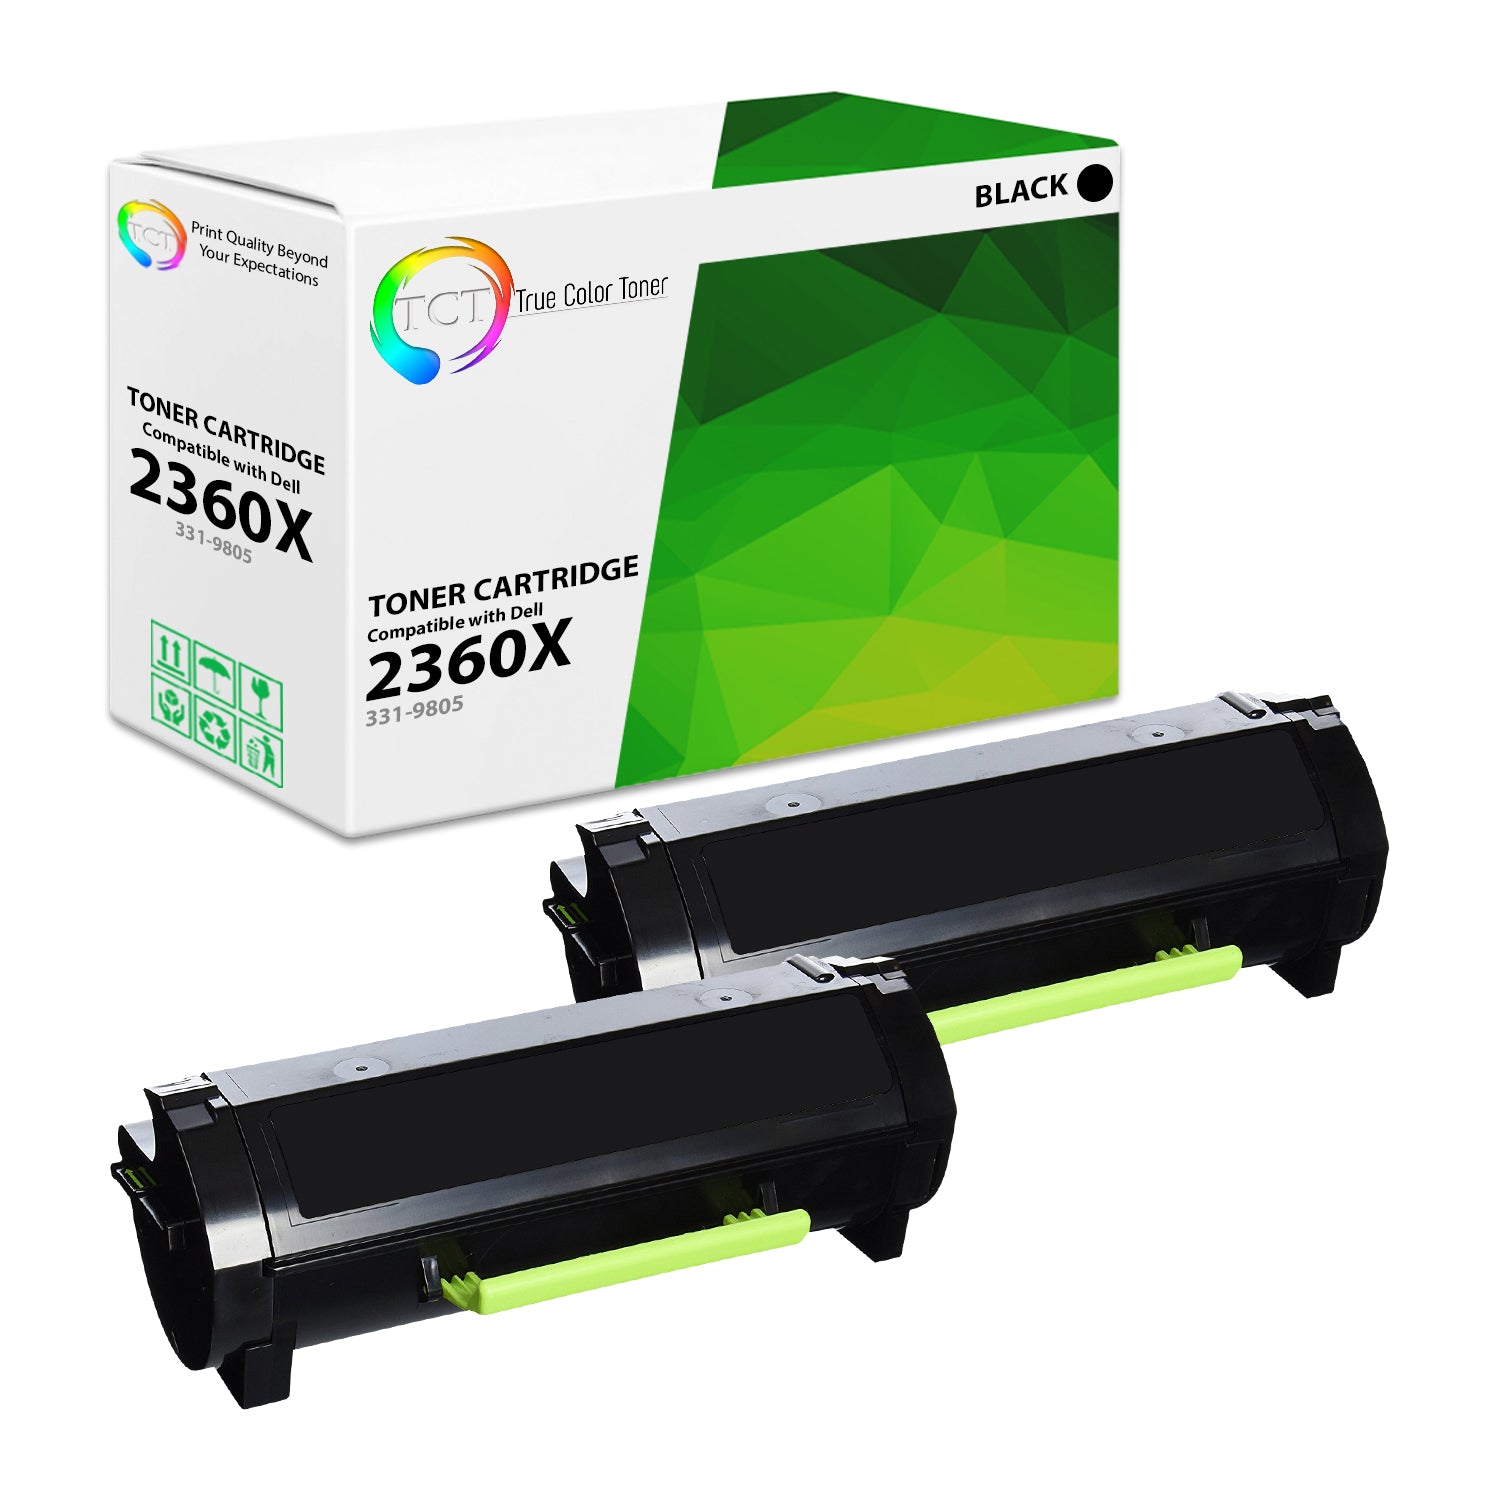 TCT Compatible High Yield Toner Cartridge Replacement for the Dell 2360 Series - 2 Pack Black